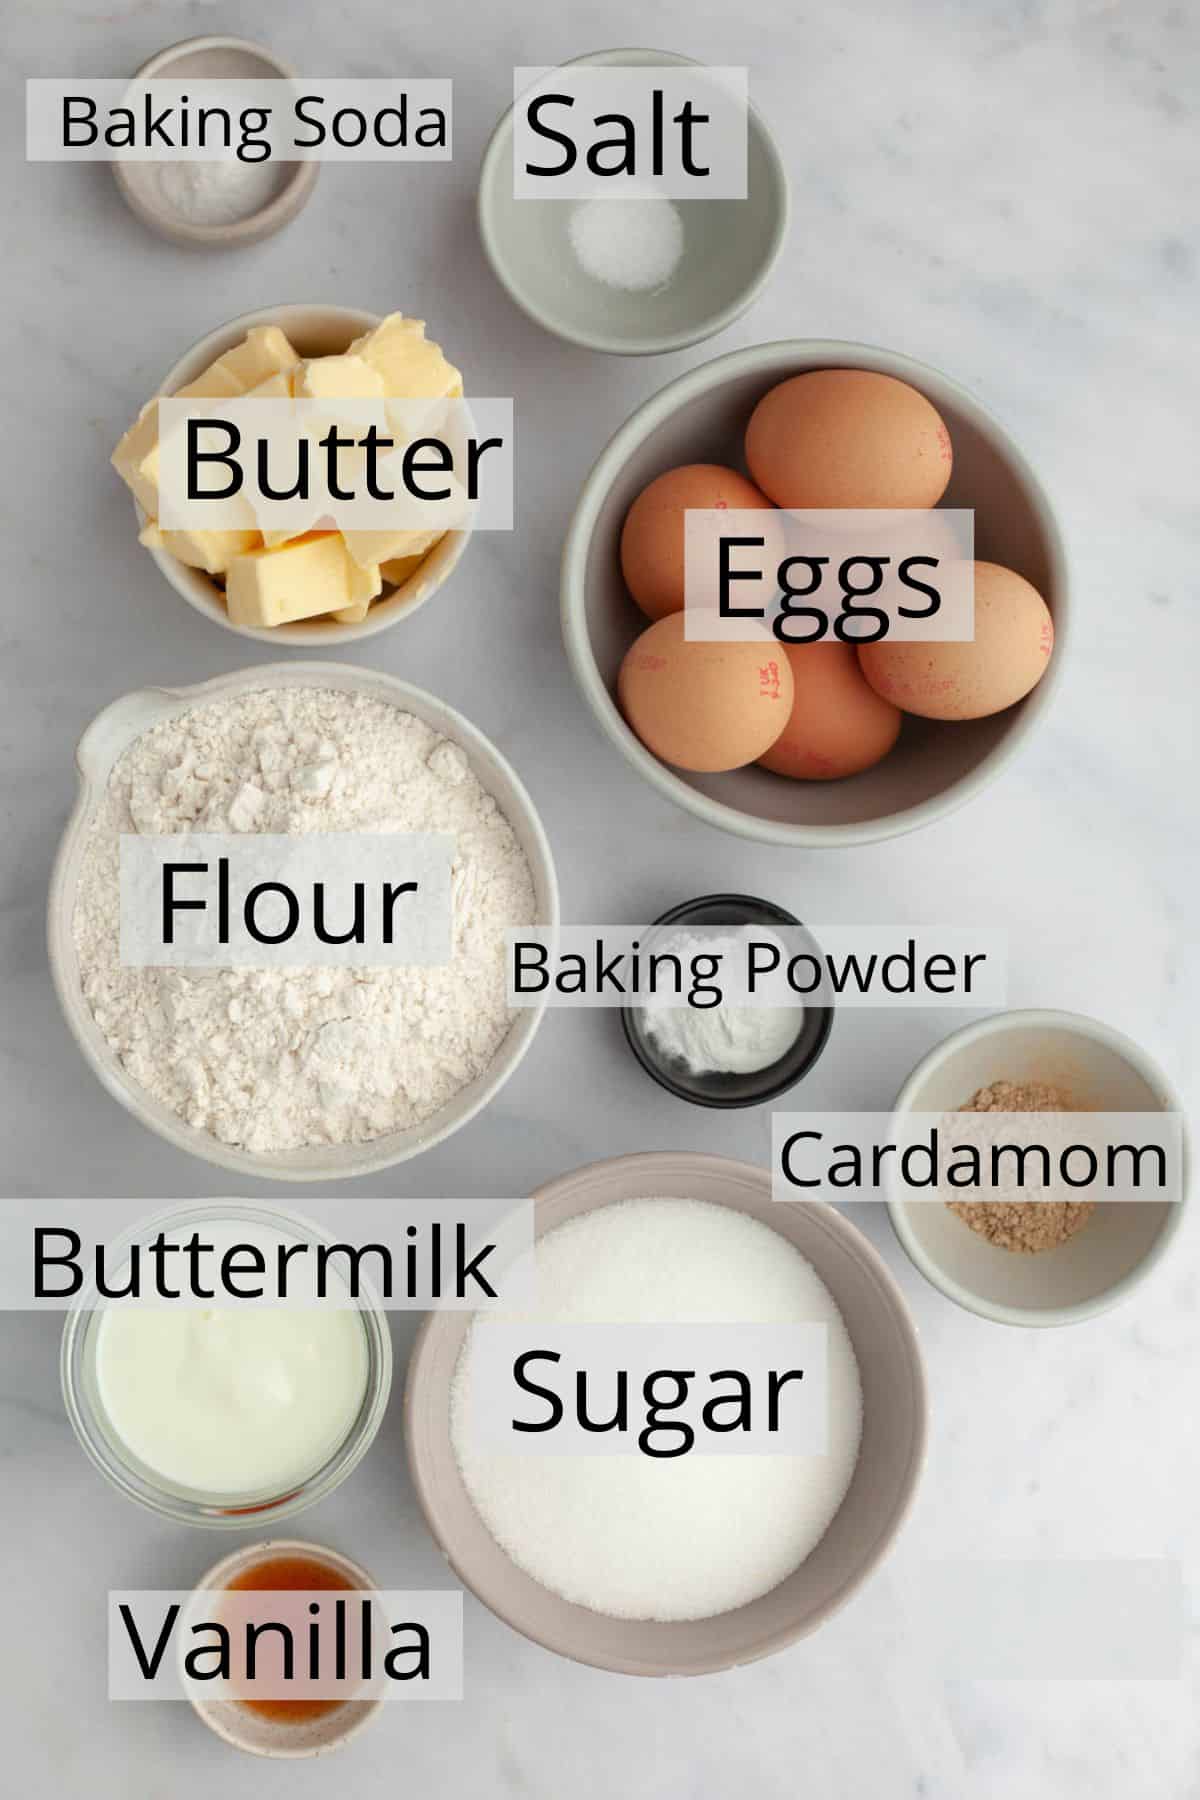 All the ingredients needed to make a cardamom cake weighed out into small bowls.